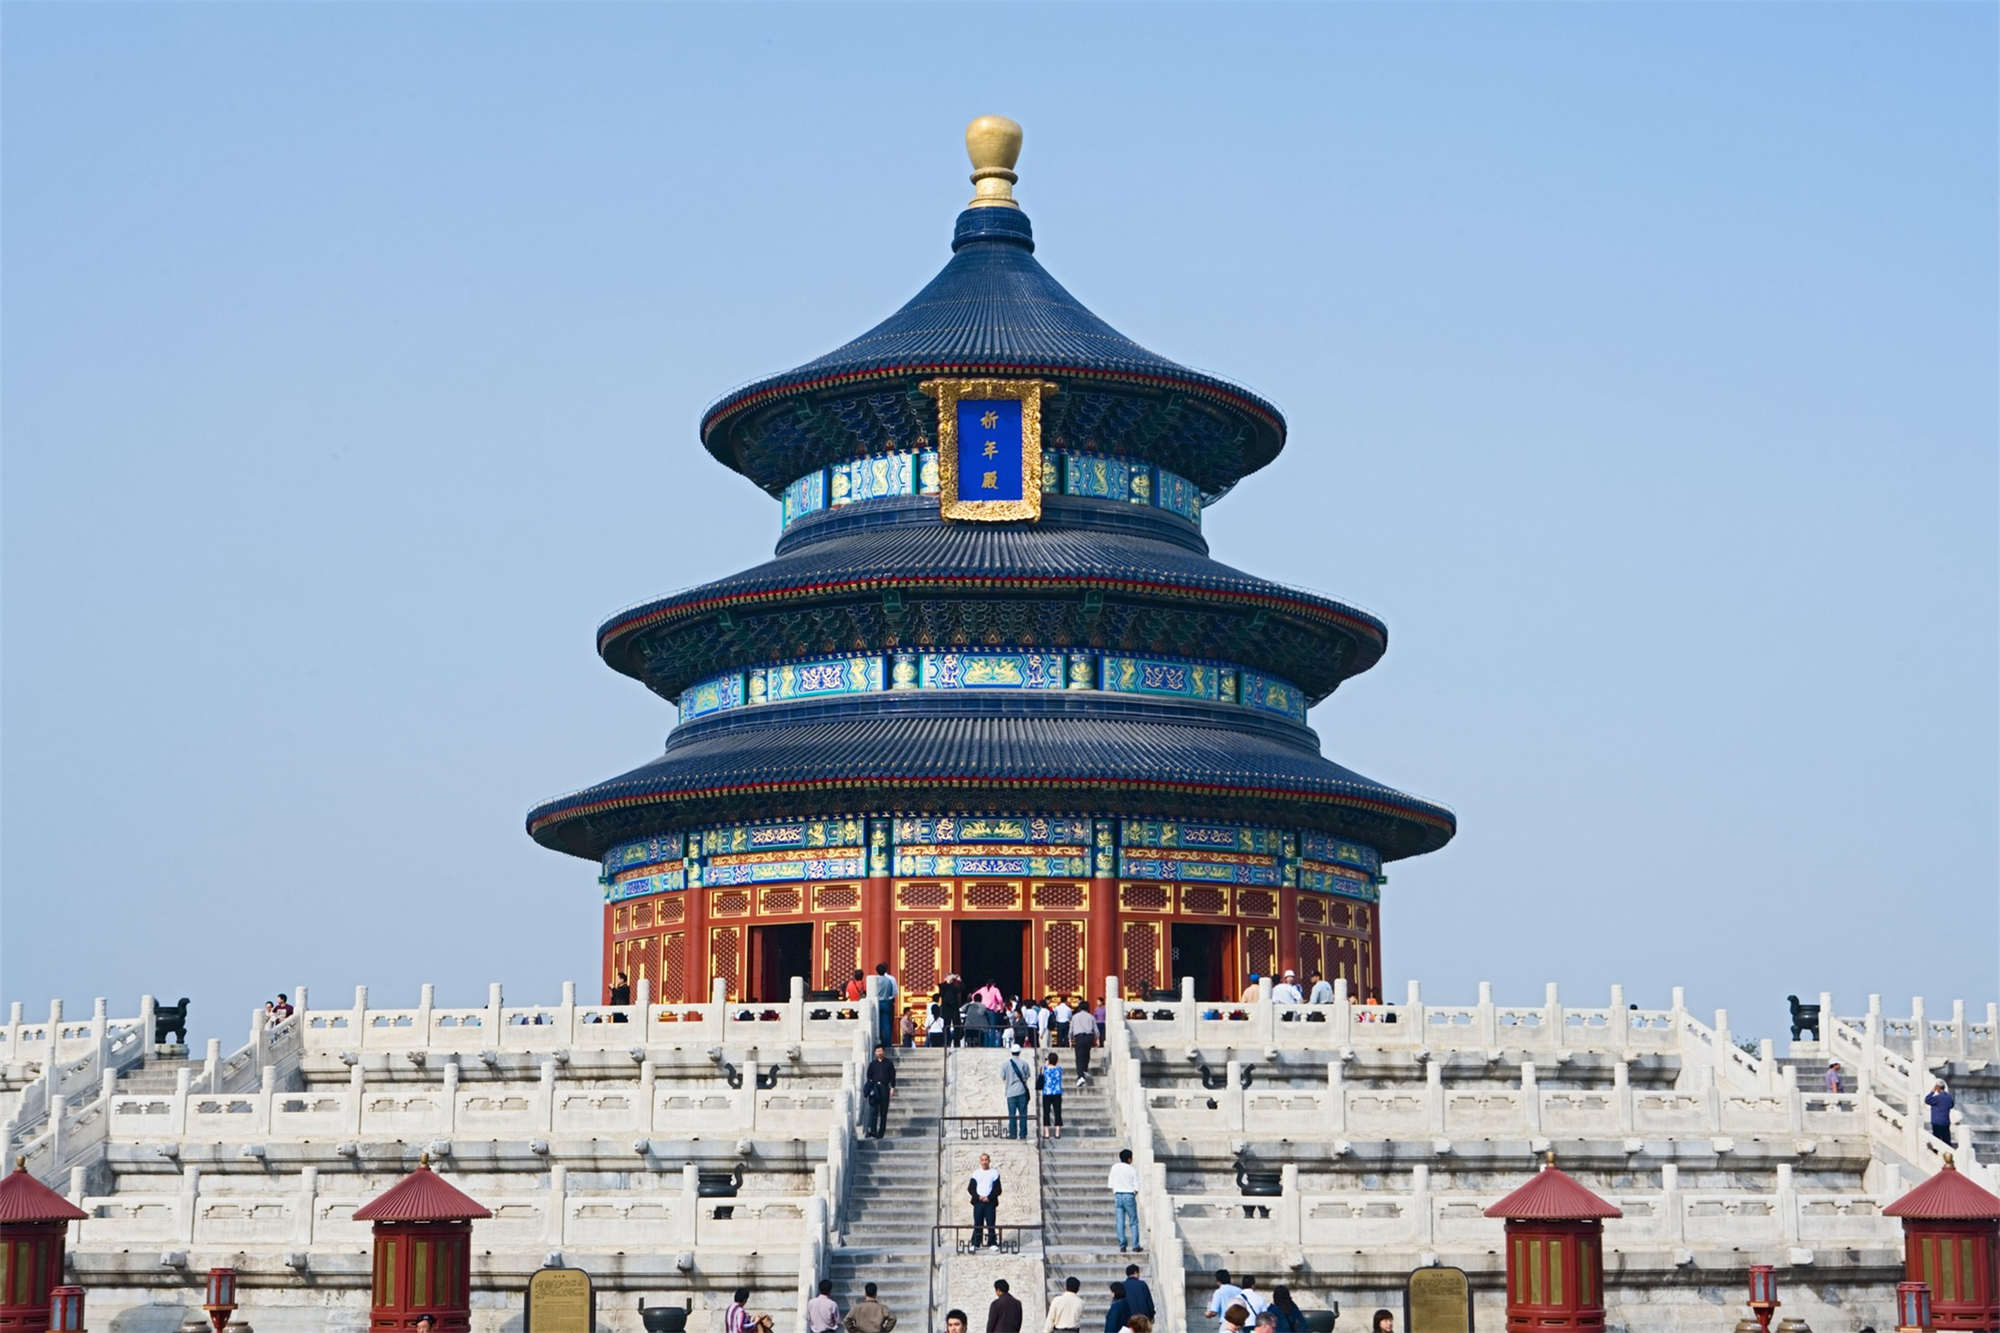 2-Day Beijing Private Tour of Forbidden City, Lama Temple, Tiananmen Square, Mutianyu Great Wall and Summer Palace